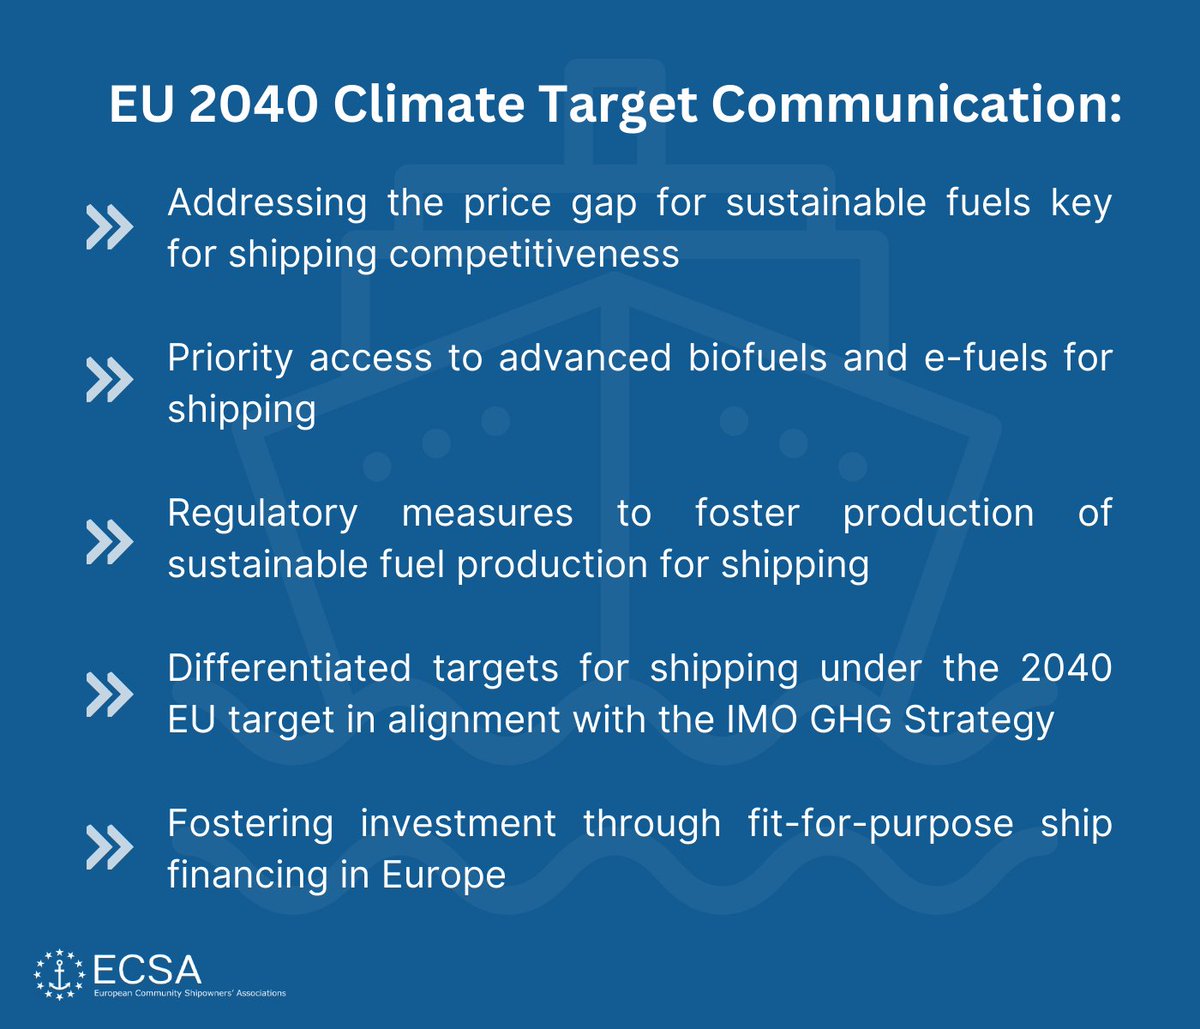 📢EU 2040 Climate Target 🇪🇺 European shipowners welcome commitments to give #shipping priority access to sustainable fuels & to address the price gap 🚢⚓️ Our statement ⤵ ecsa.eu/news/eu-2040-c… #AllHandsOnDeck #EU2040